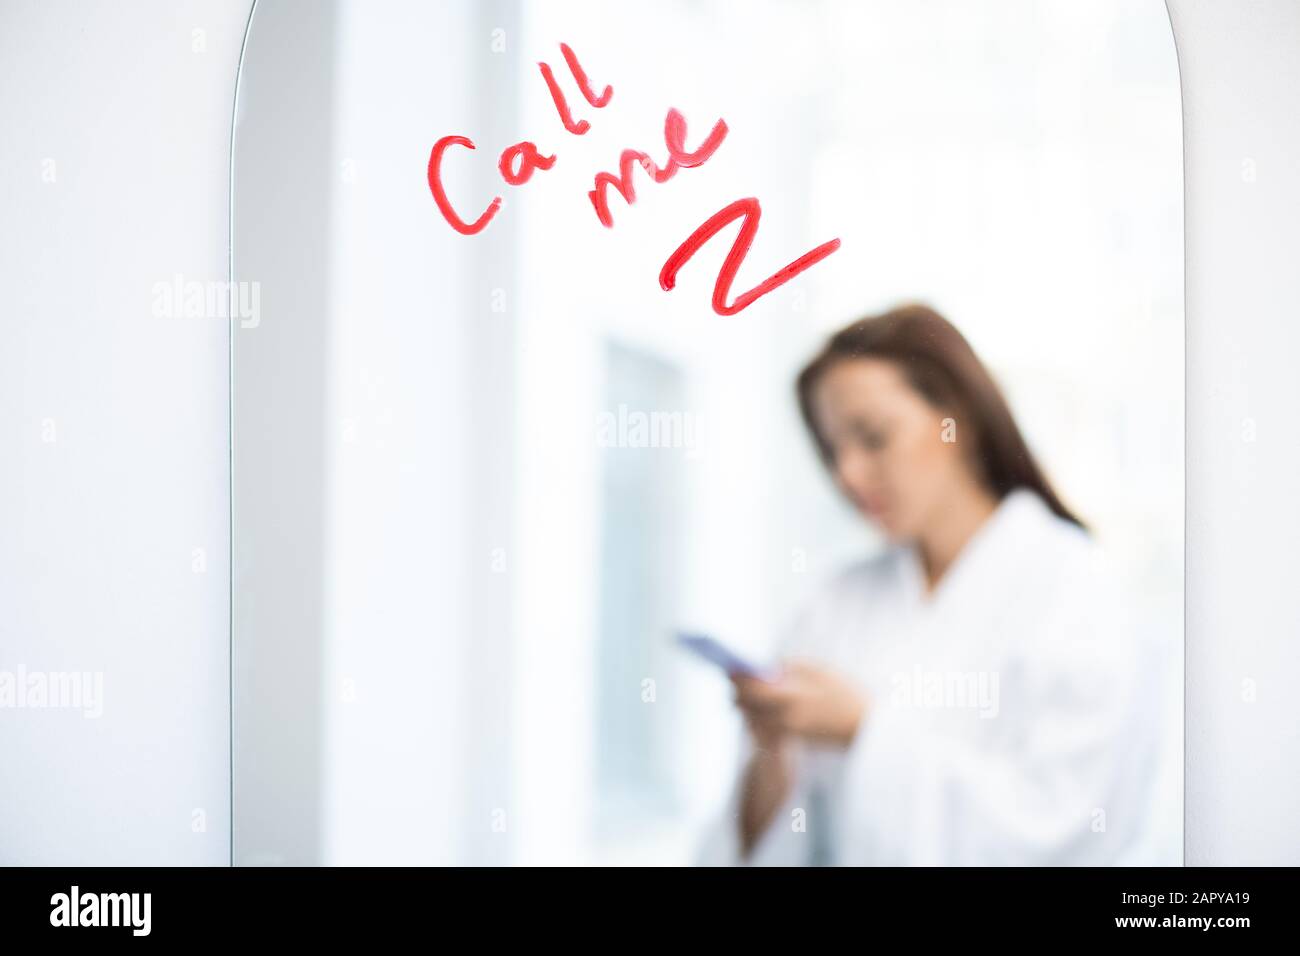 Part of mirror with asking for call written with lipstick and reflection of girl Stock Photo